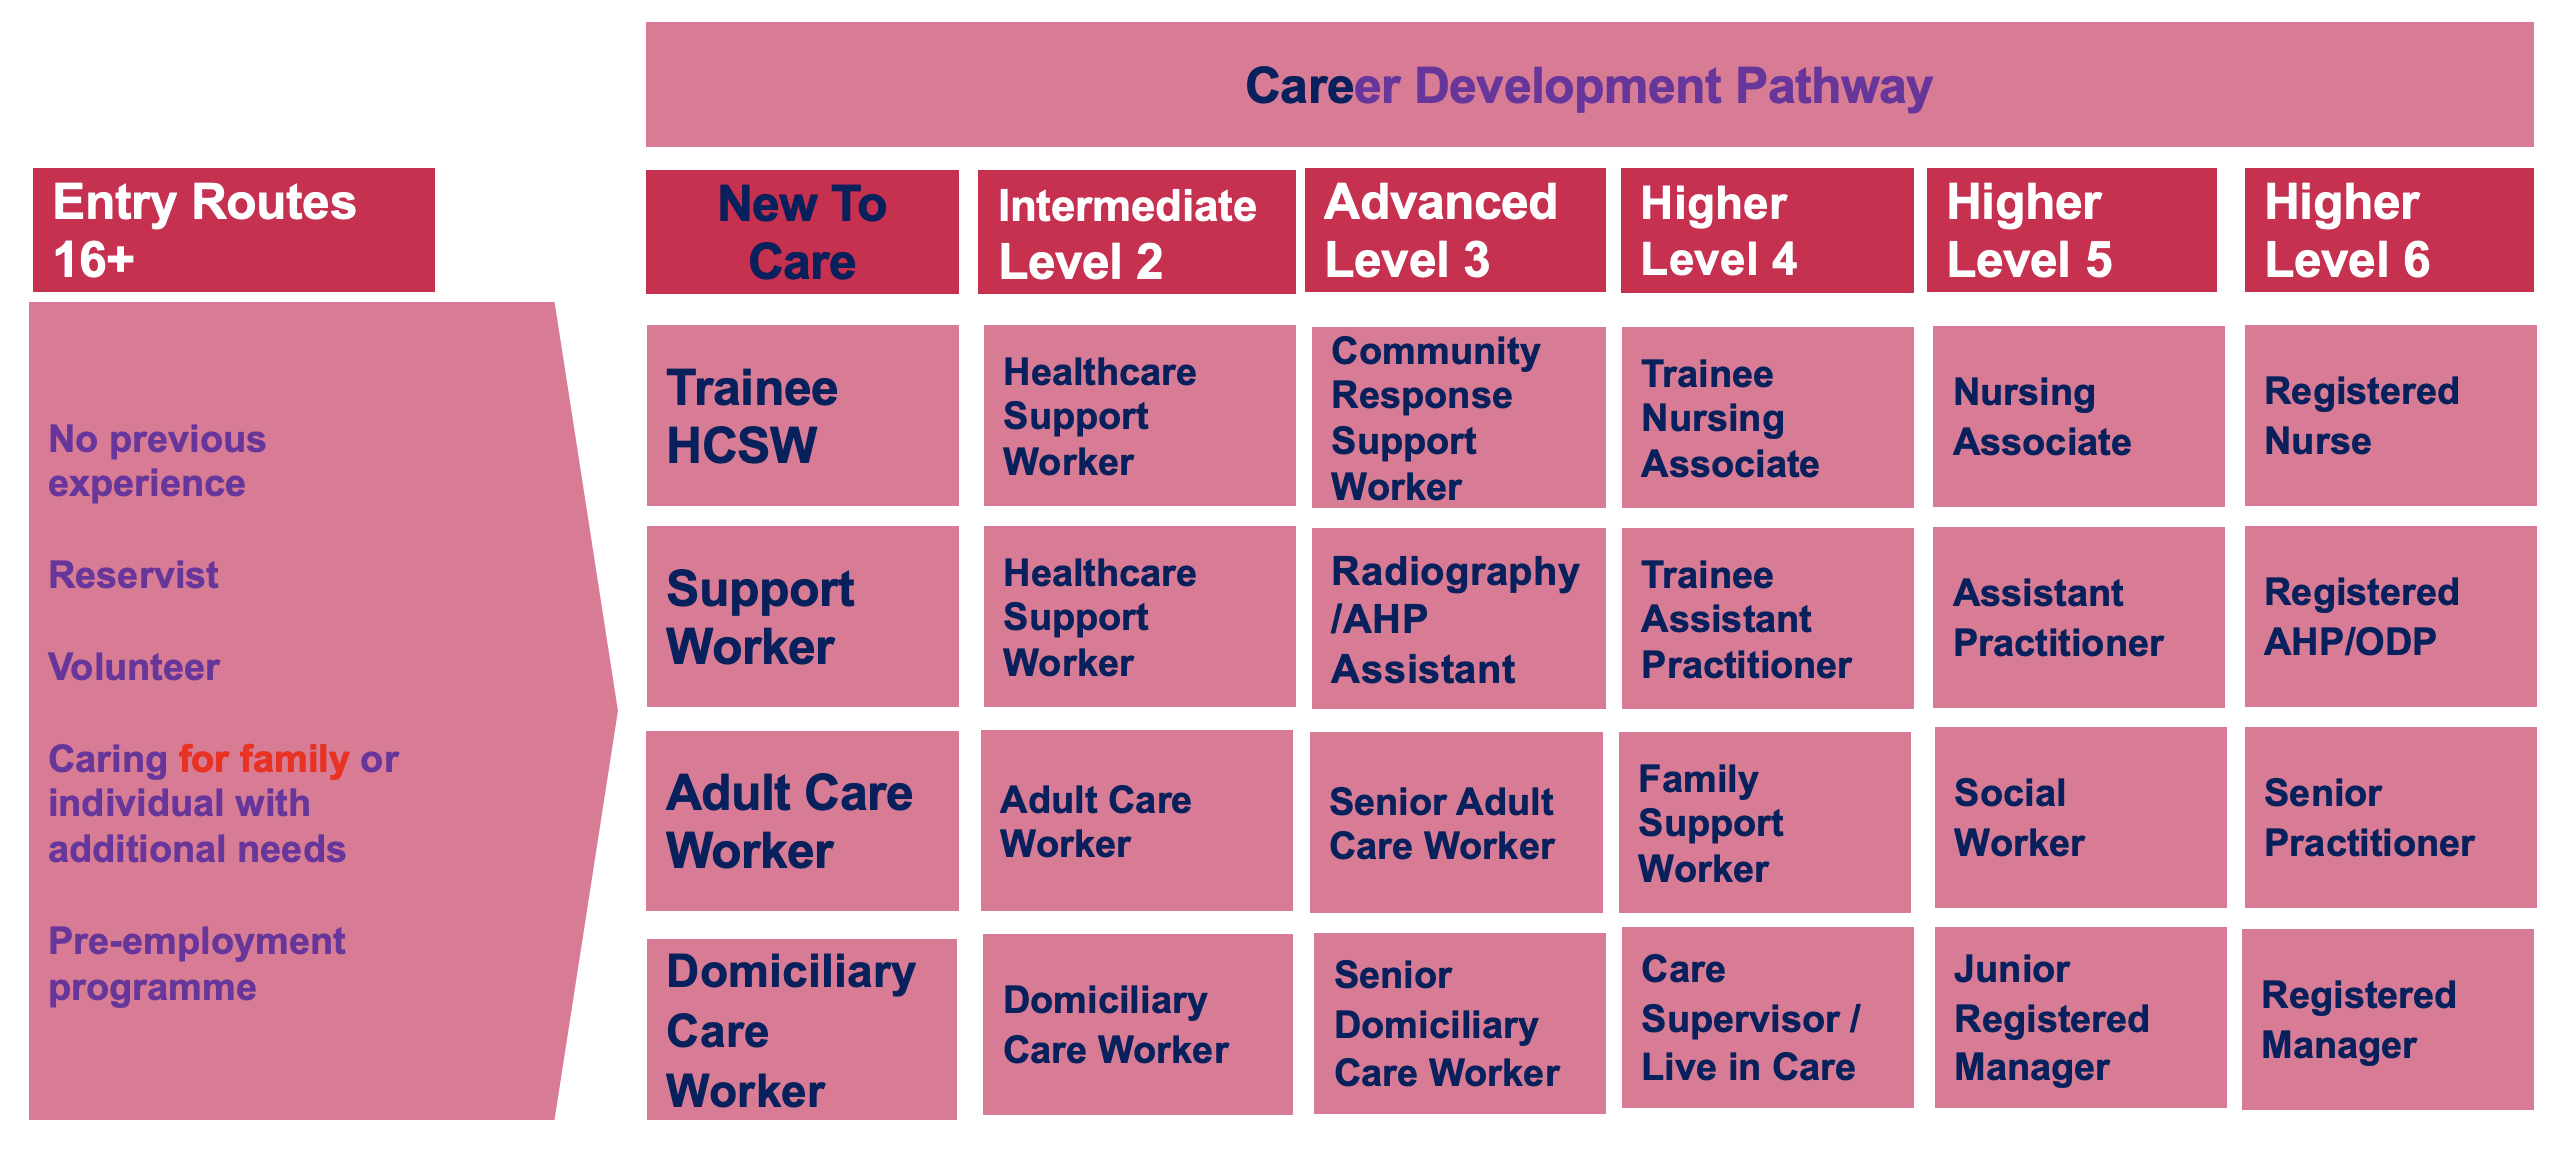 How to progress your career in care